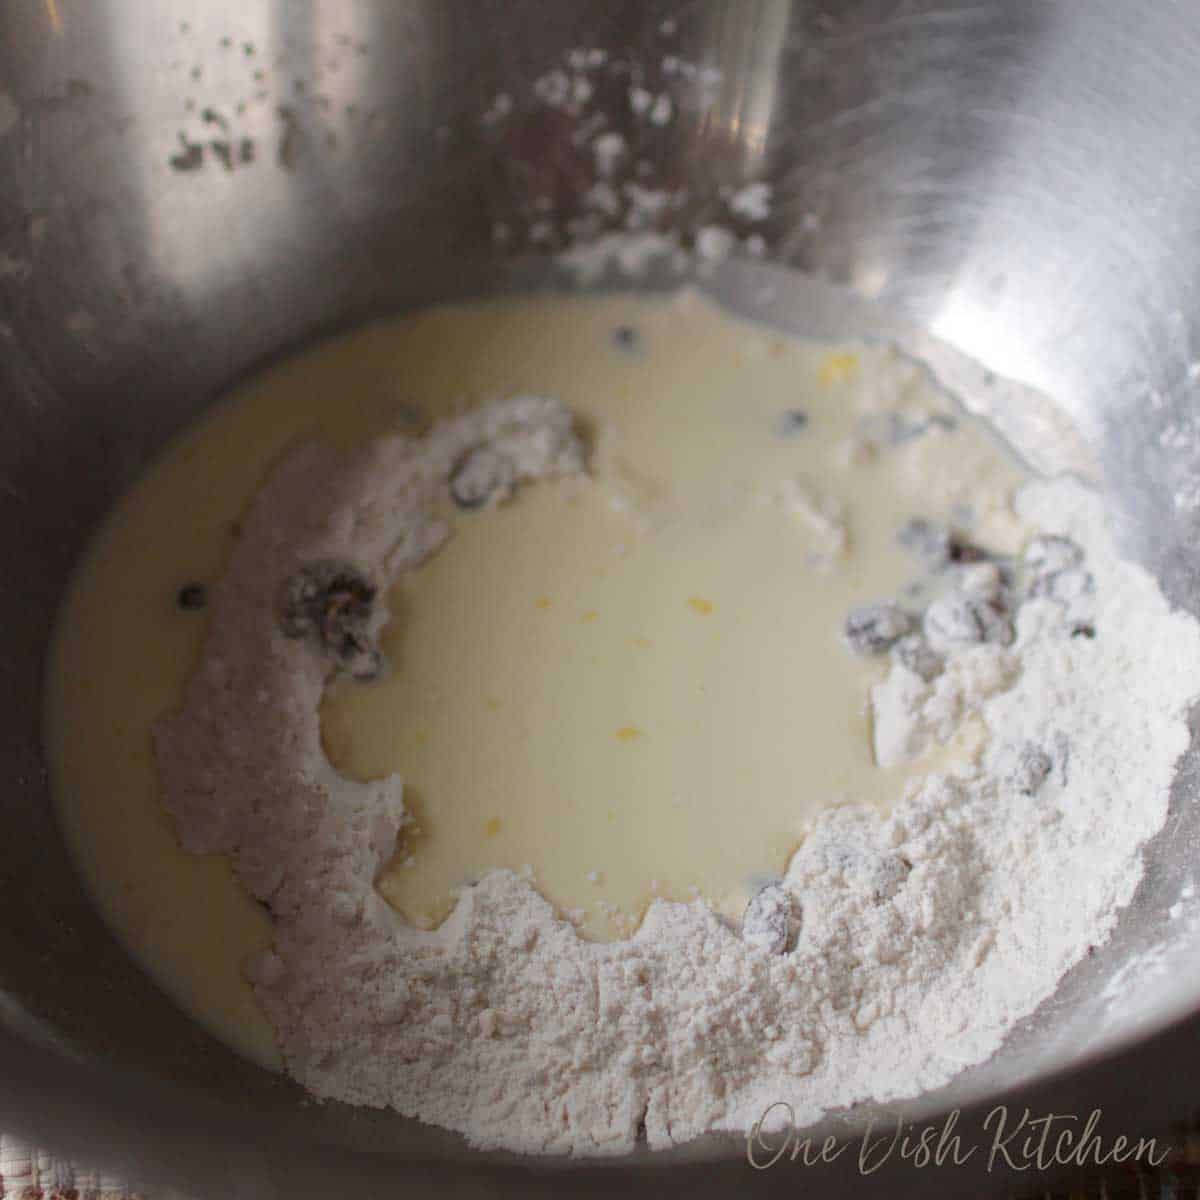 Egg yolk and buttermilk added to the mixture in the large bowl.